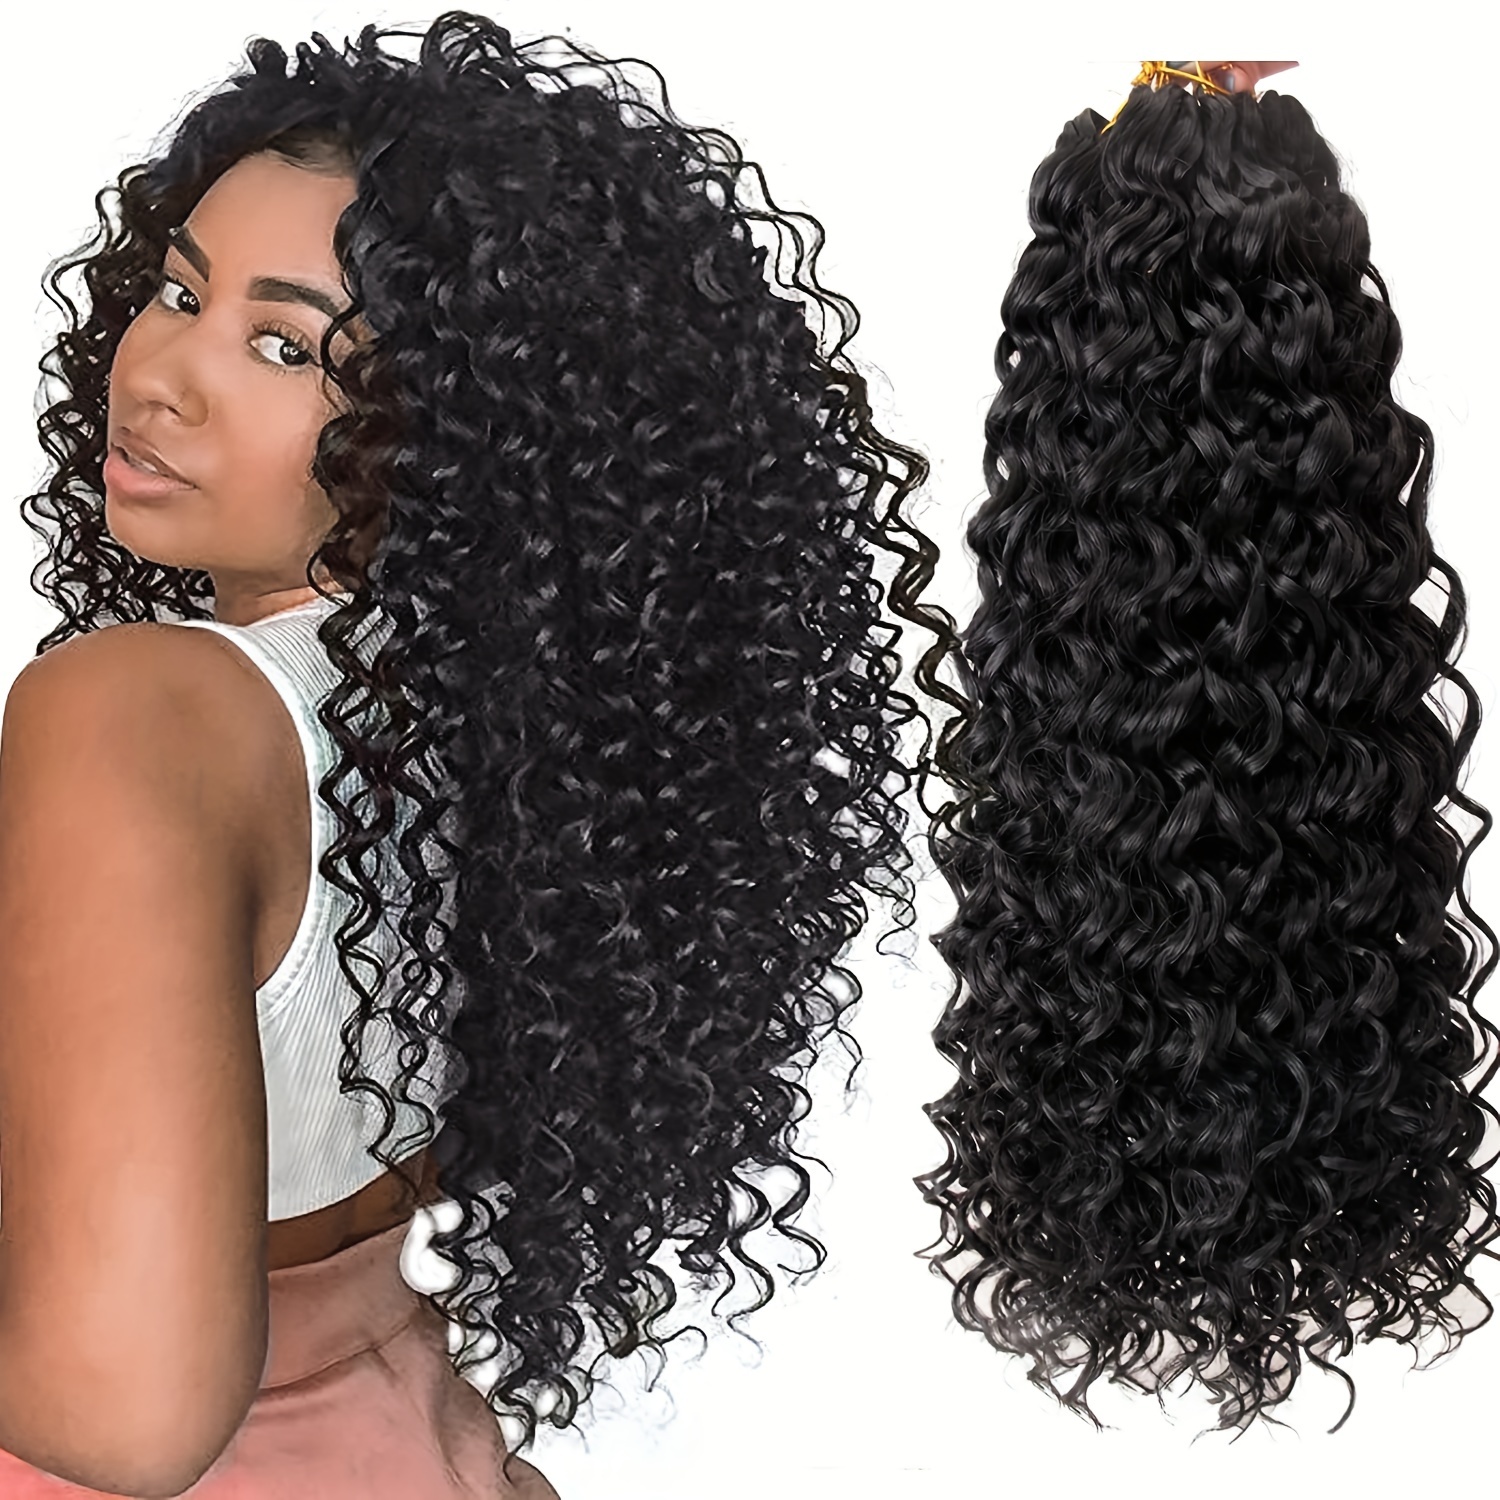 Ocean Wave Crochet Curly Hair Extensions 22 Inches Deep Wave Twist